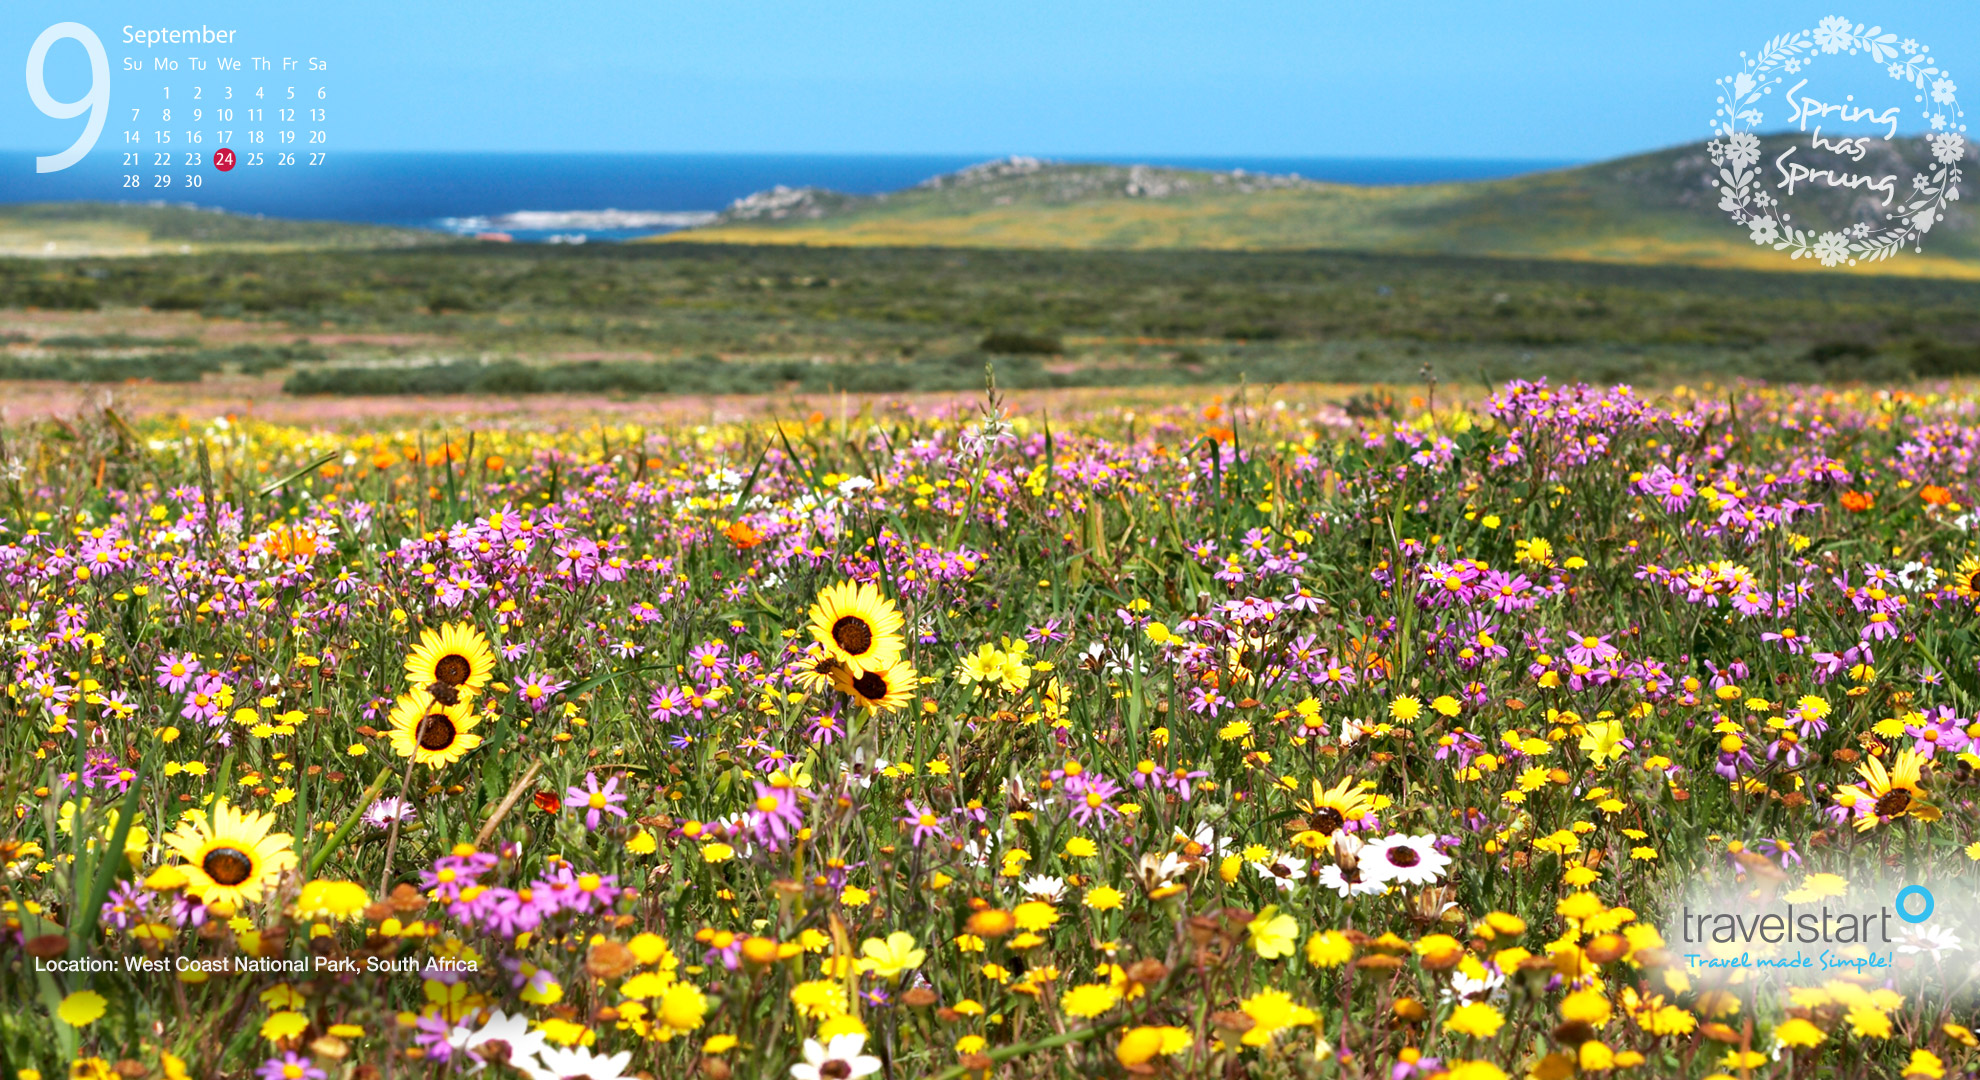 Download your free September 2014 wallpaper calendar featuring the West Coast National Park spring flowers.